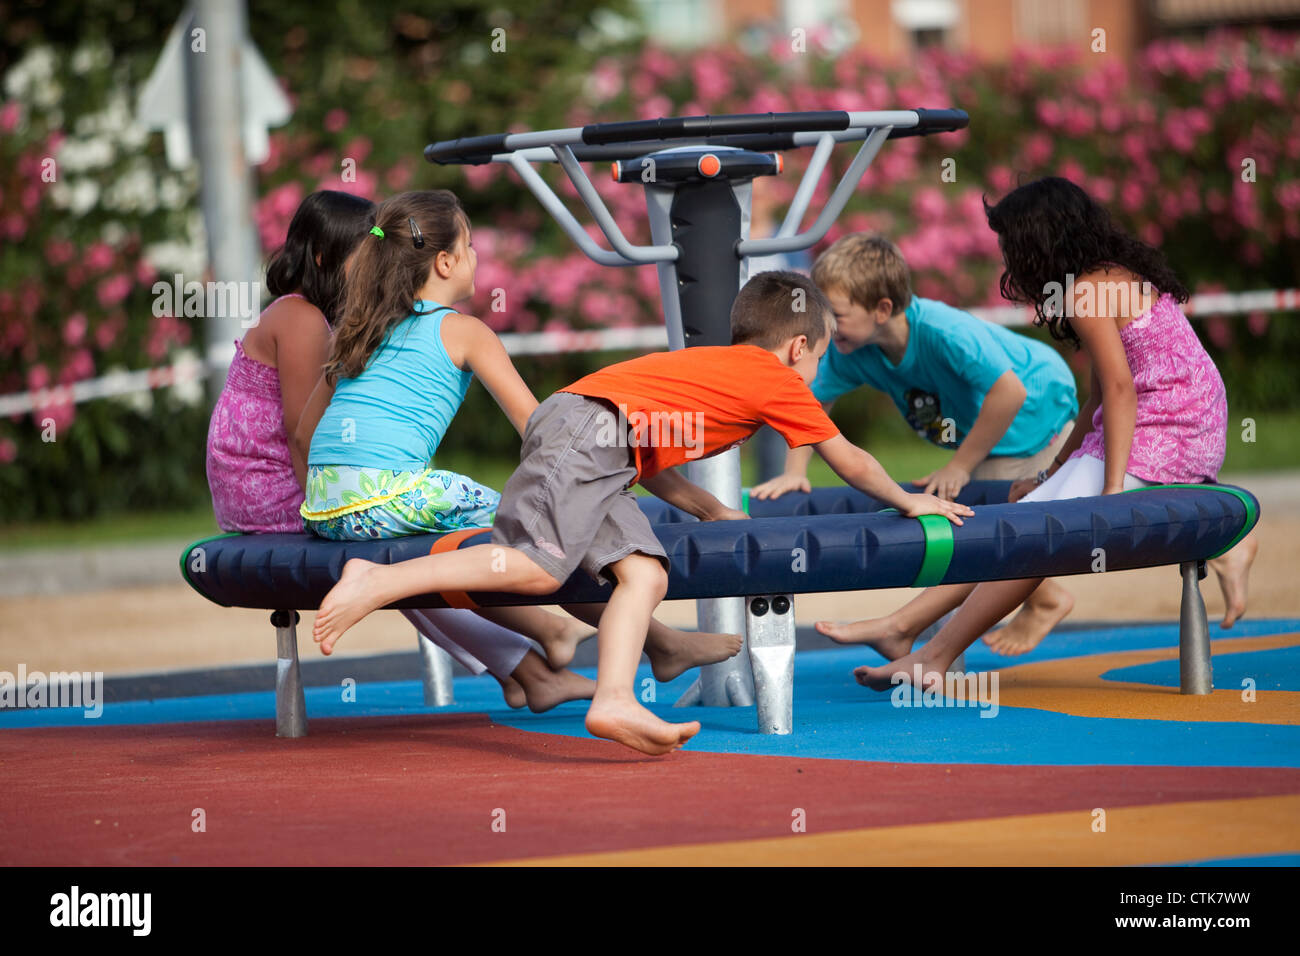 Children playing in a playground Stock Photo